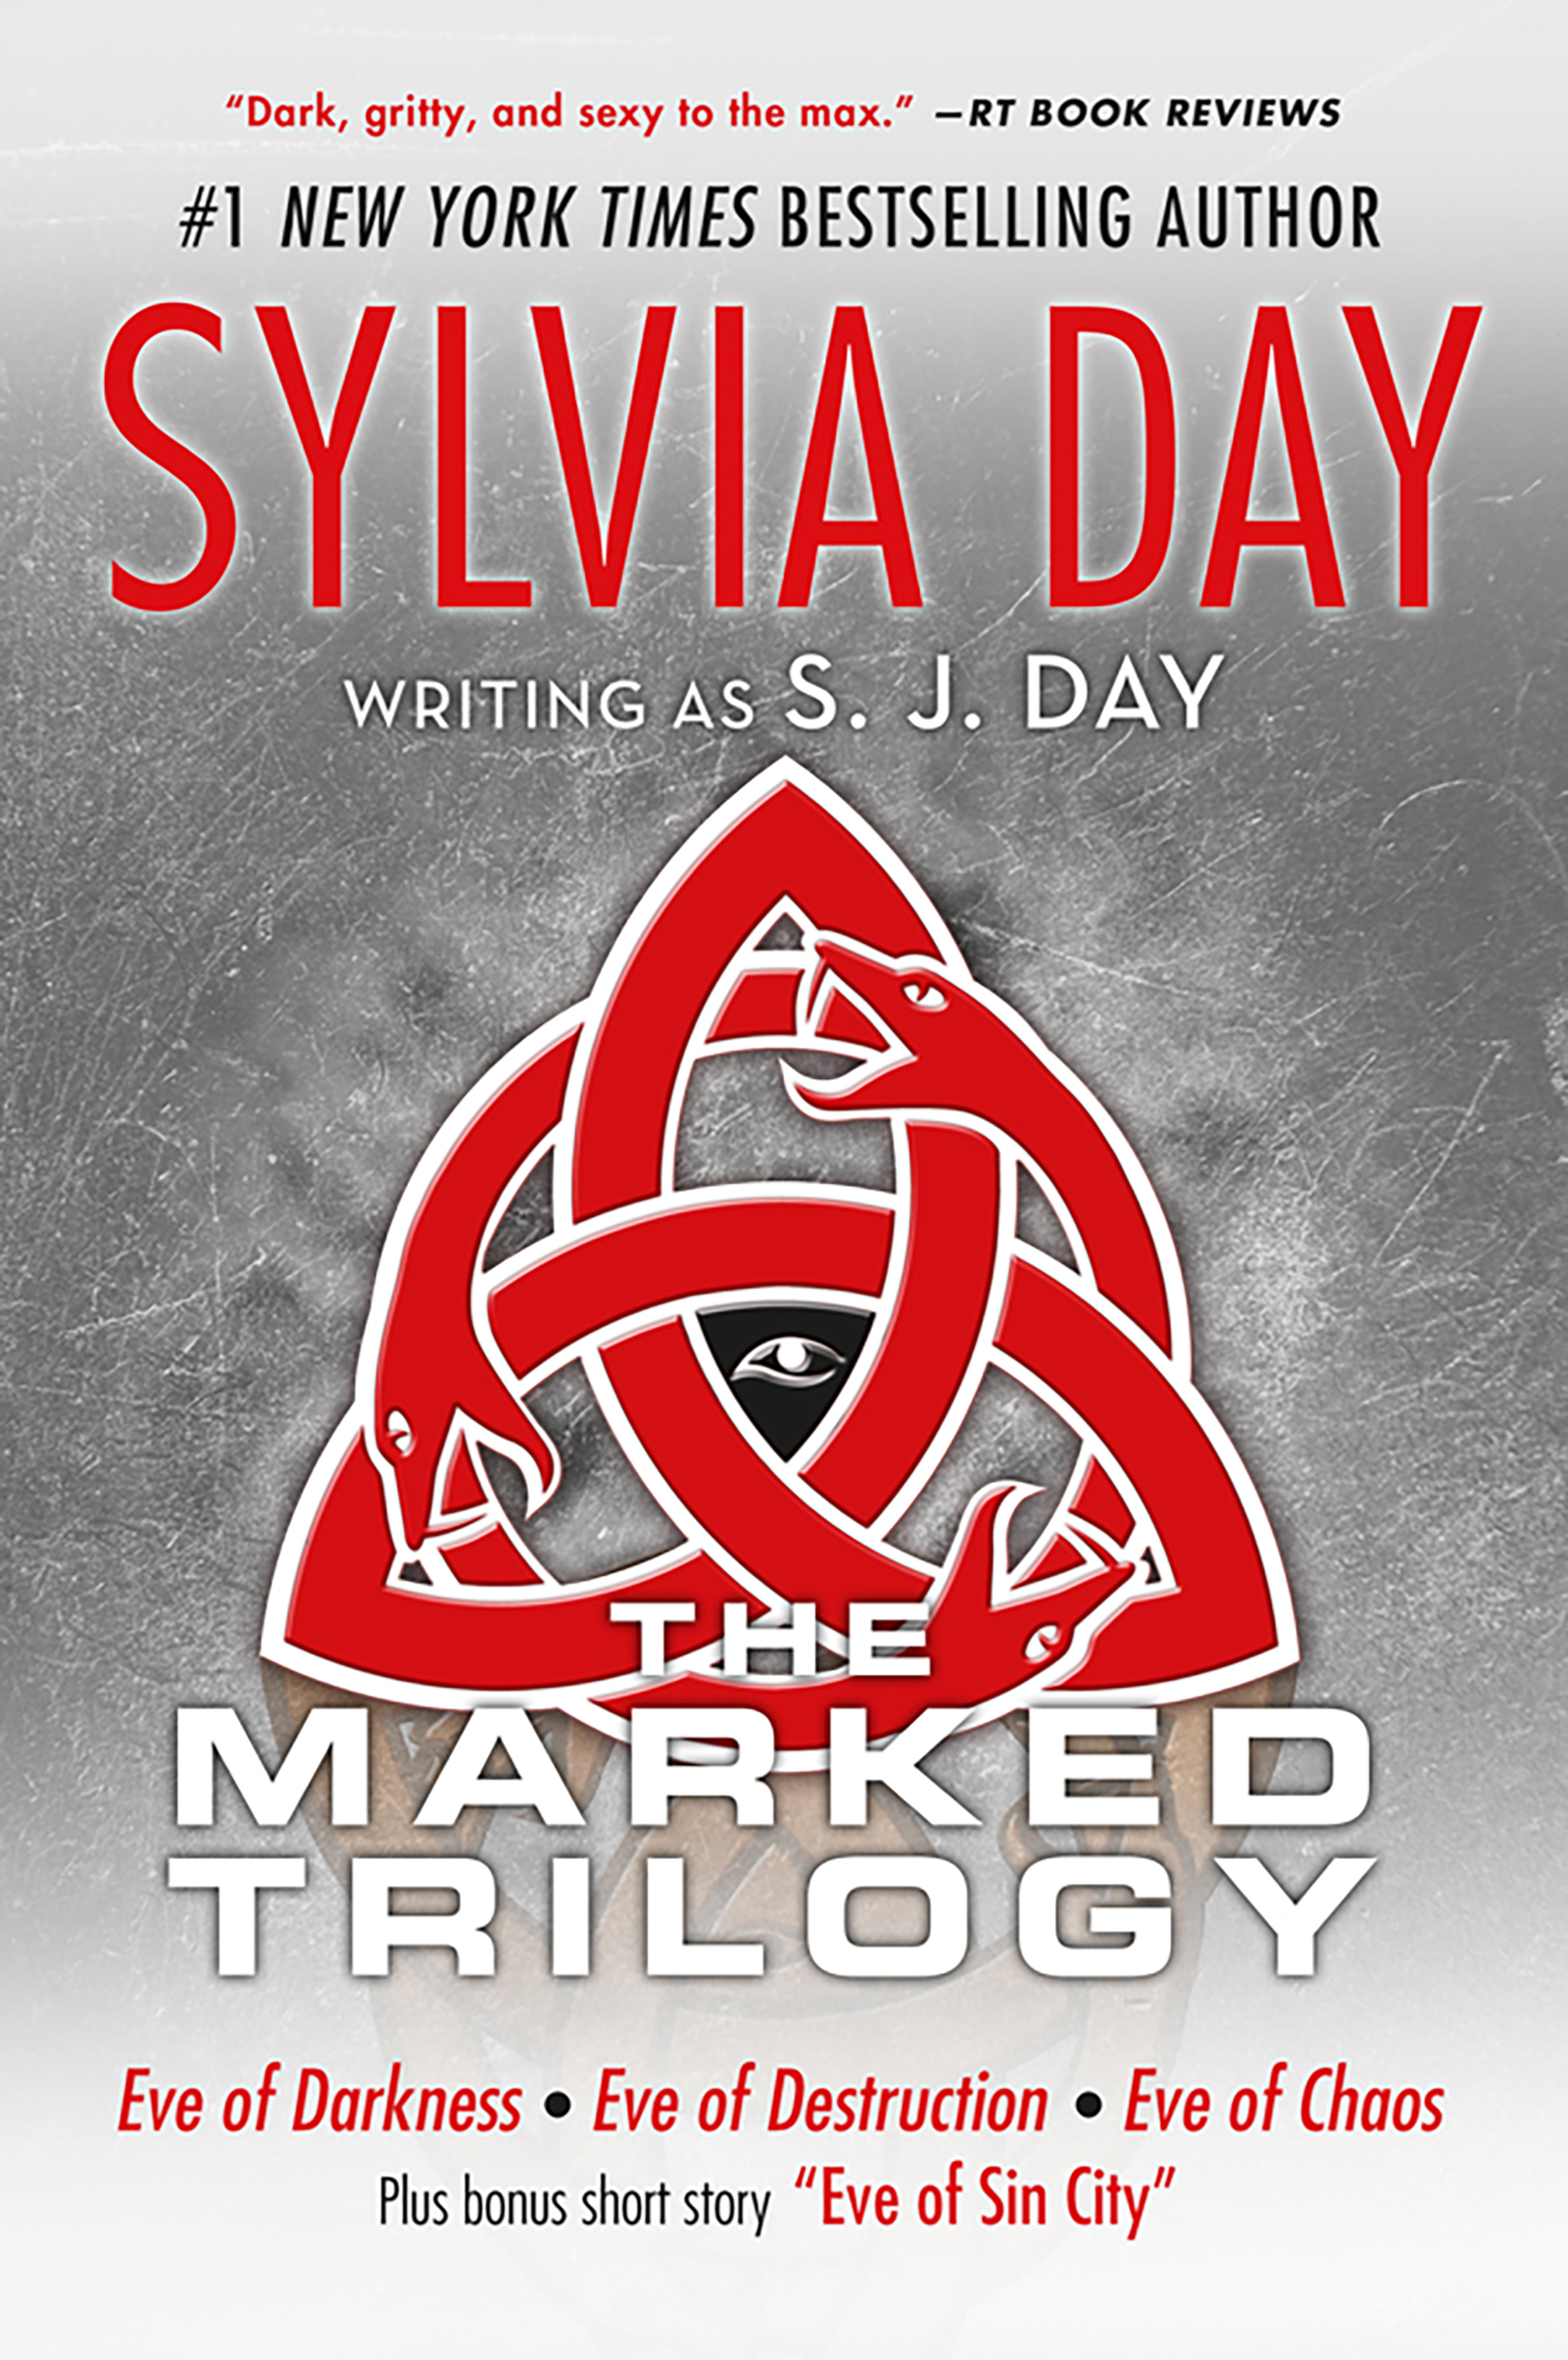 The Marked Trilogy : (Eve of Darkness, Eve of Destruction, Eve of Chaos, Eve of Sin City) by Sylvia Day, S. J. Day